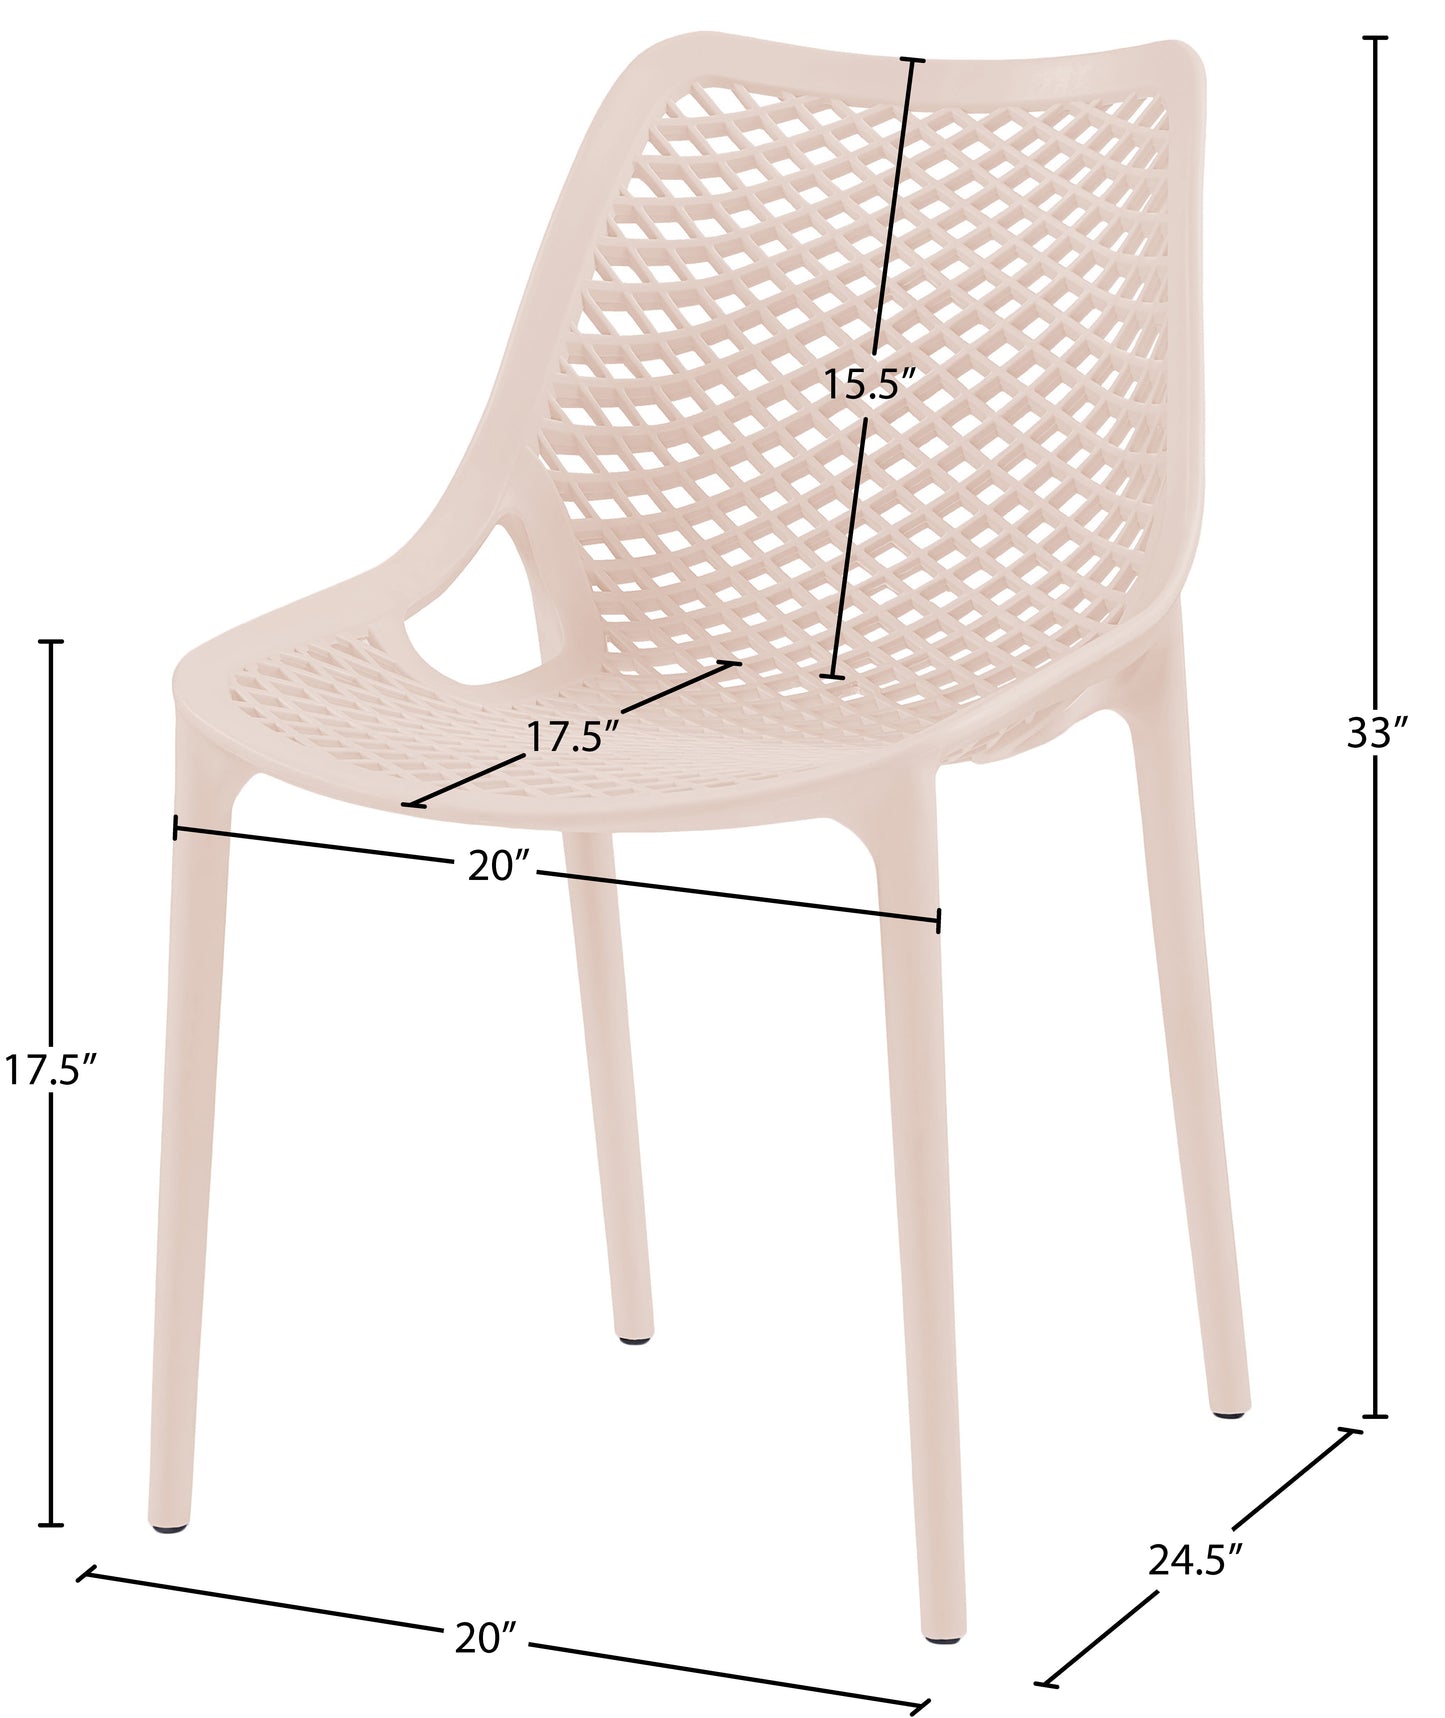 jayce pink outdoor patio dining chair pink